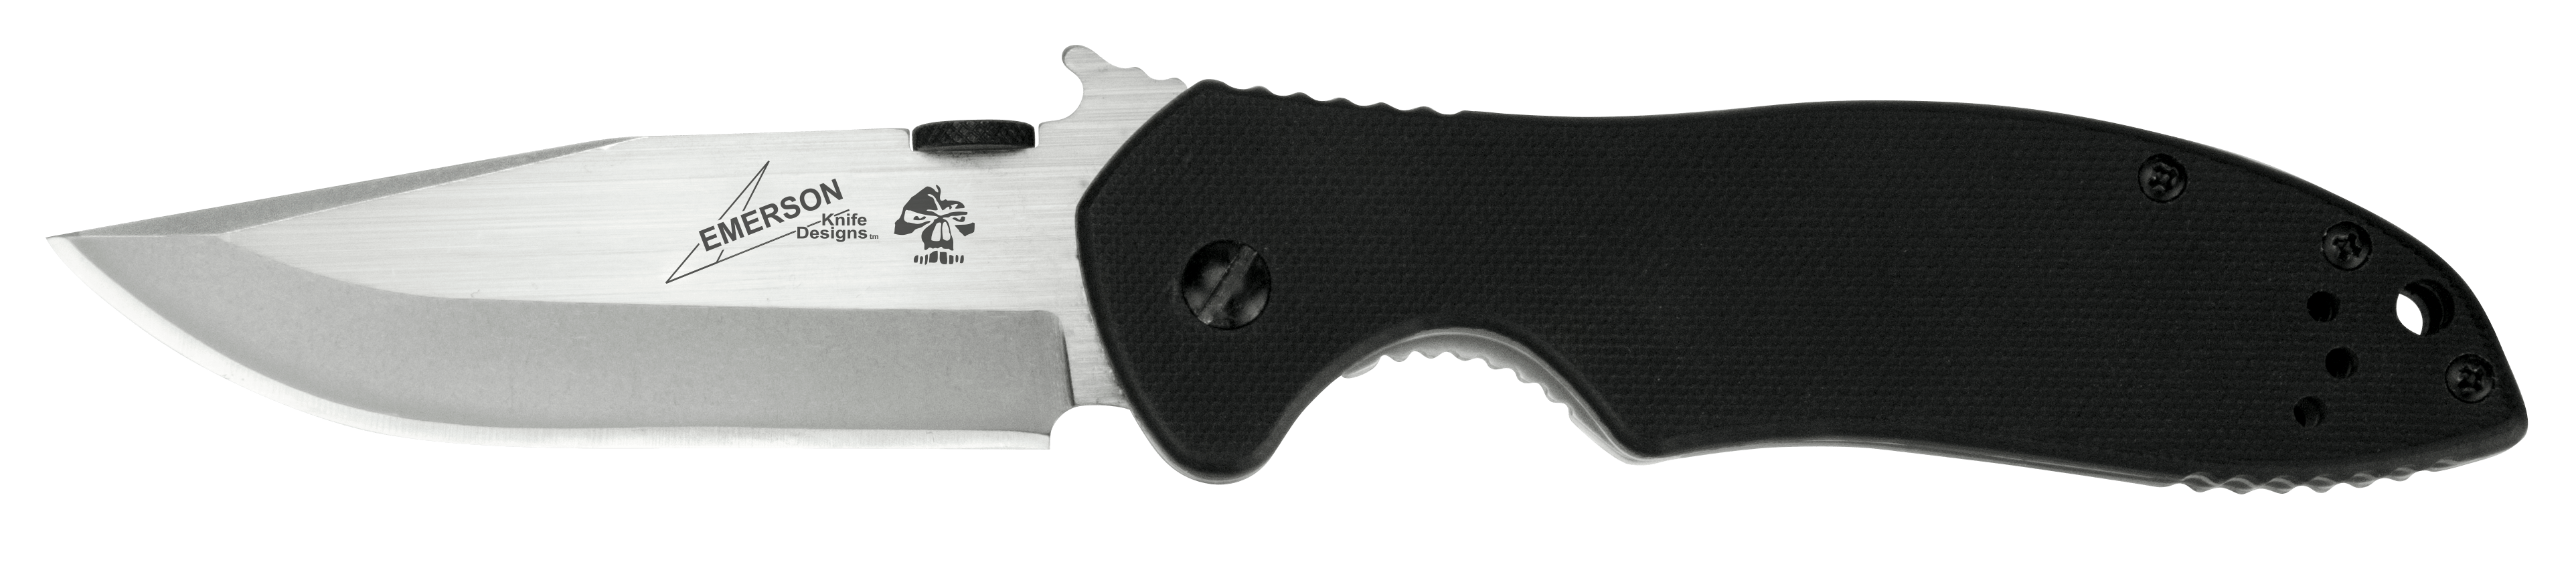 Kershaw Knives Thermite Model 3880BW